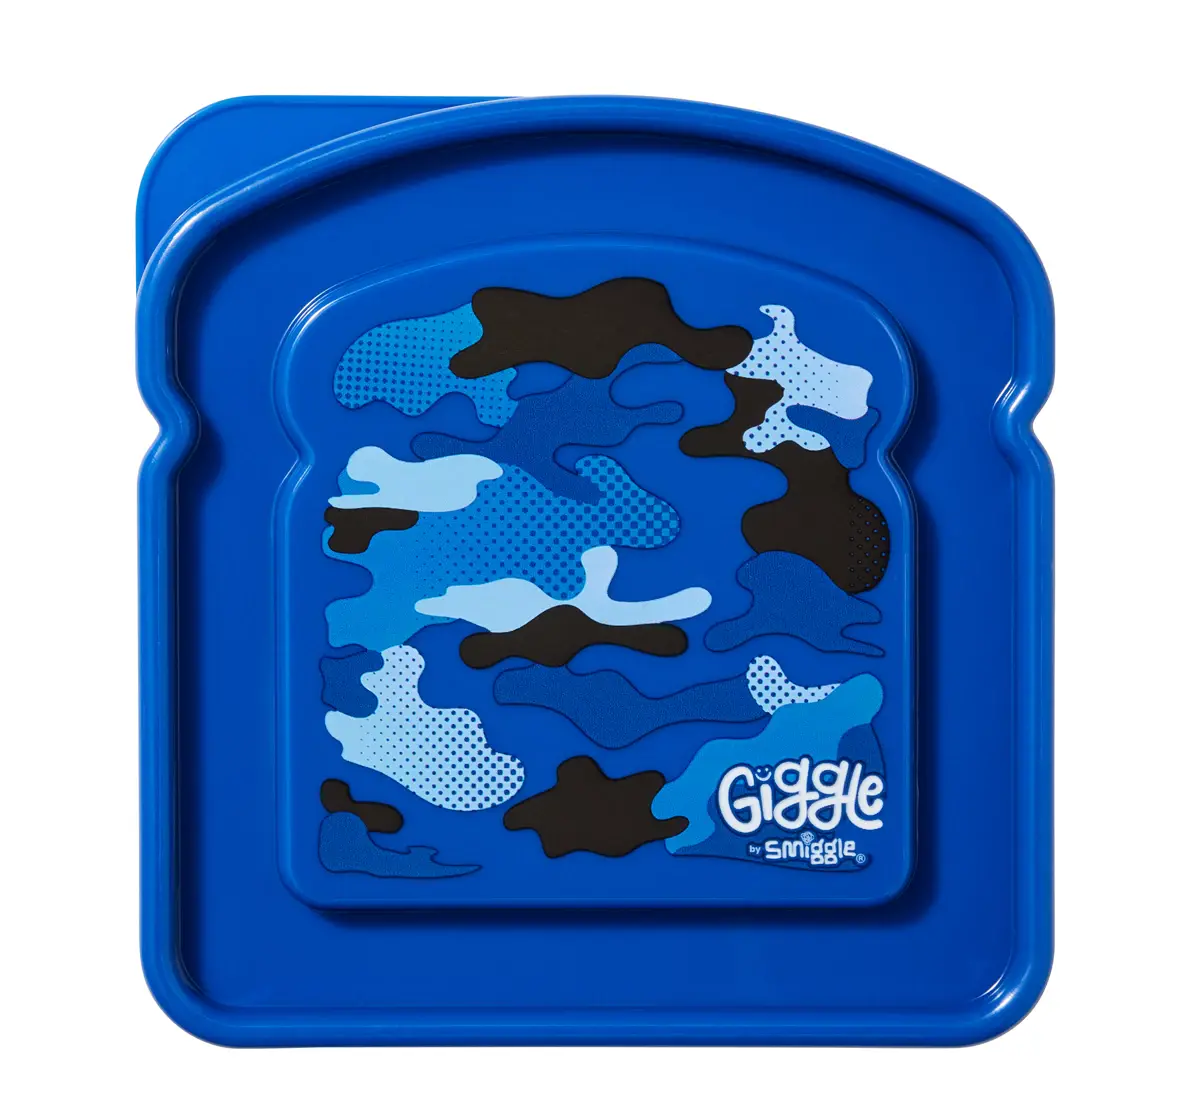 Smiggle Giggle 7 Sandwich Container, Navy Blue, 3Y+